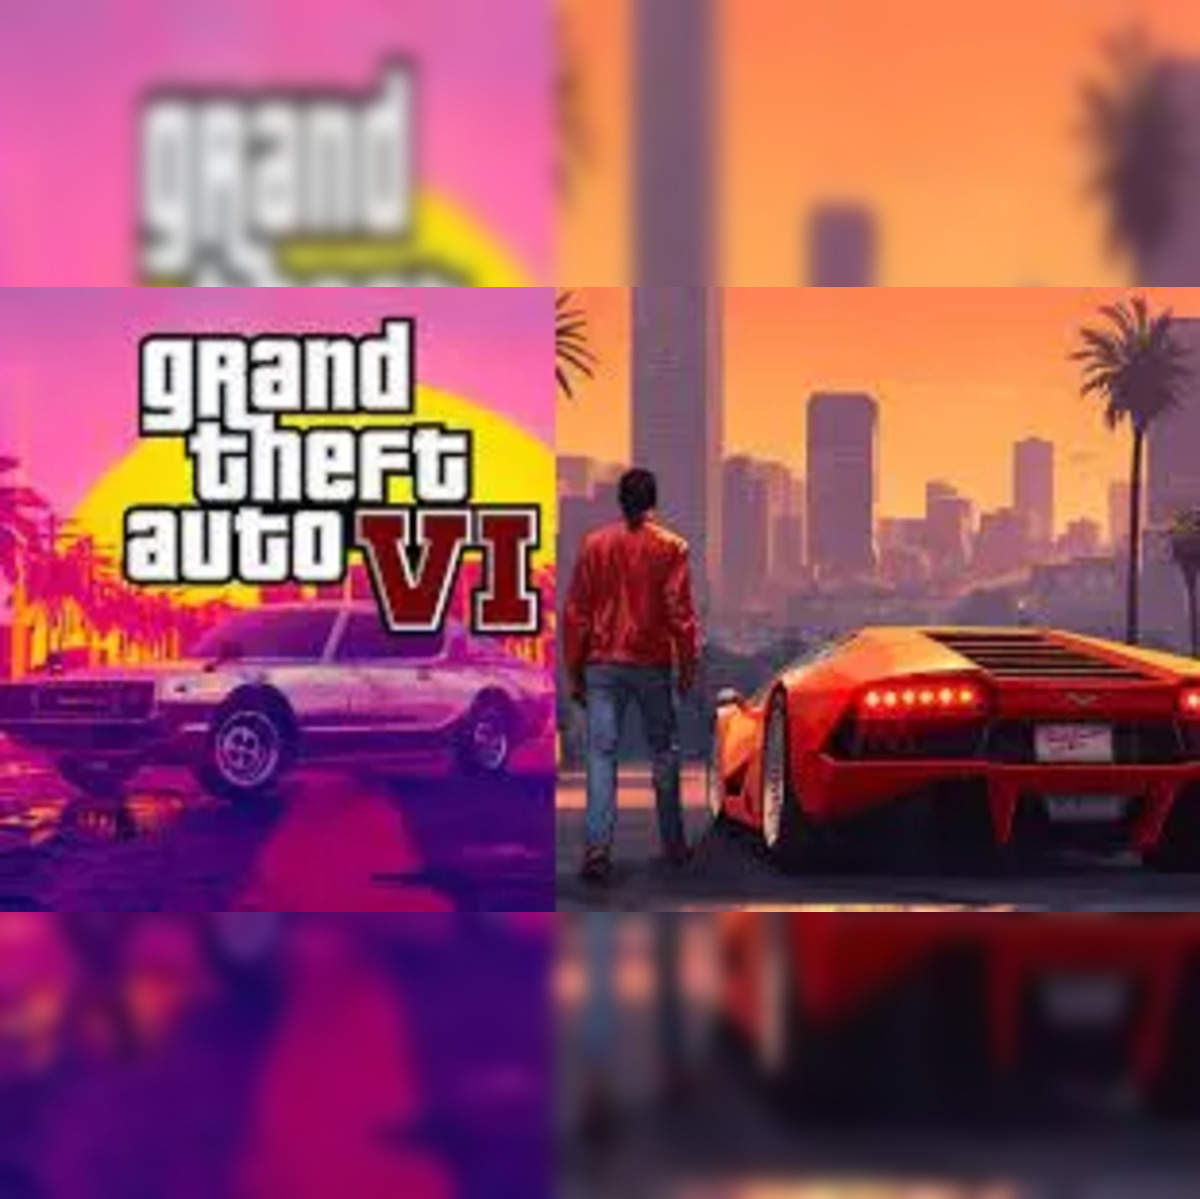 GTA 6 trailer leaked on X / Twitter, forcing Rockstar Games to release an  official version early